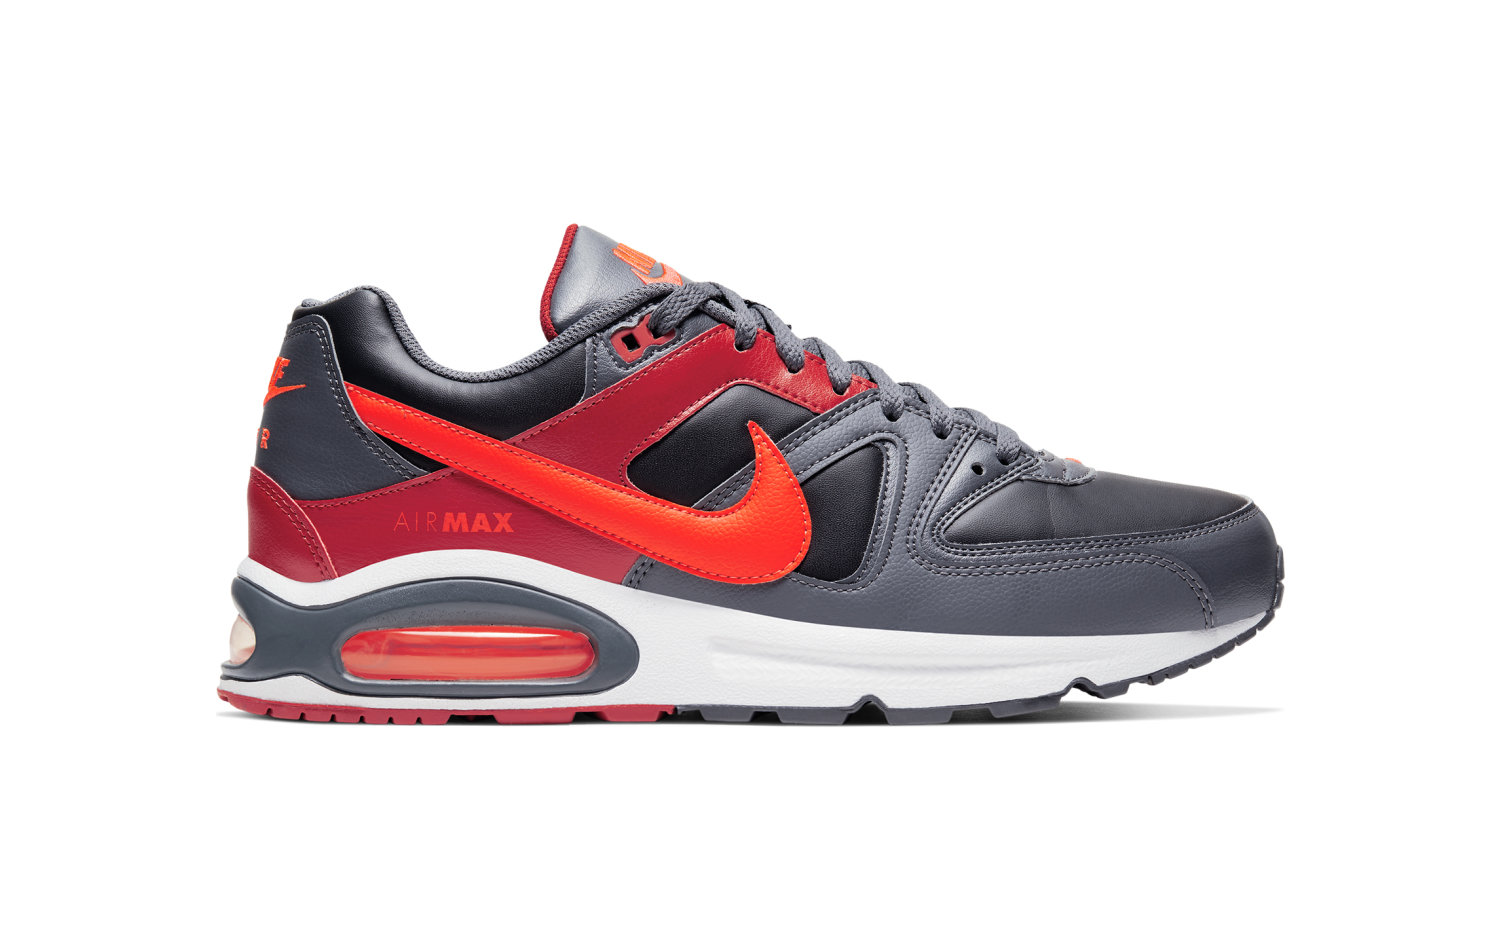 Industrialize Open reins nike air max command eladó fire bus go shopping